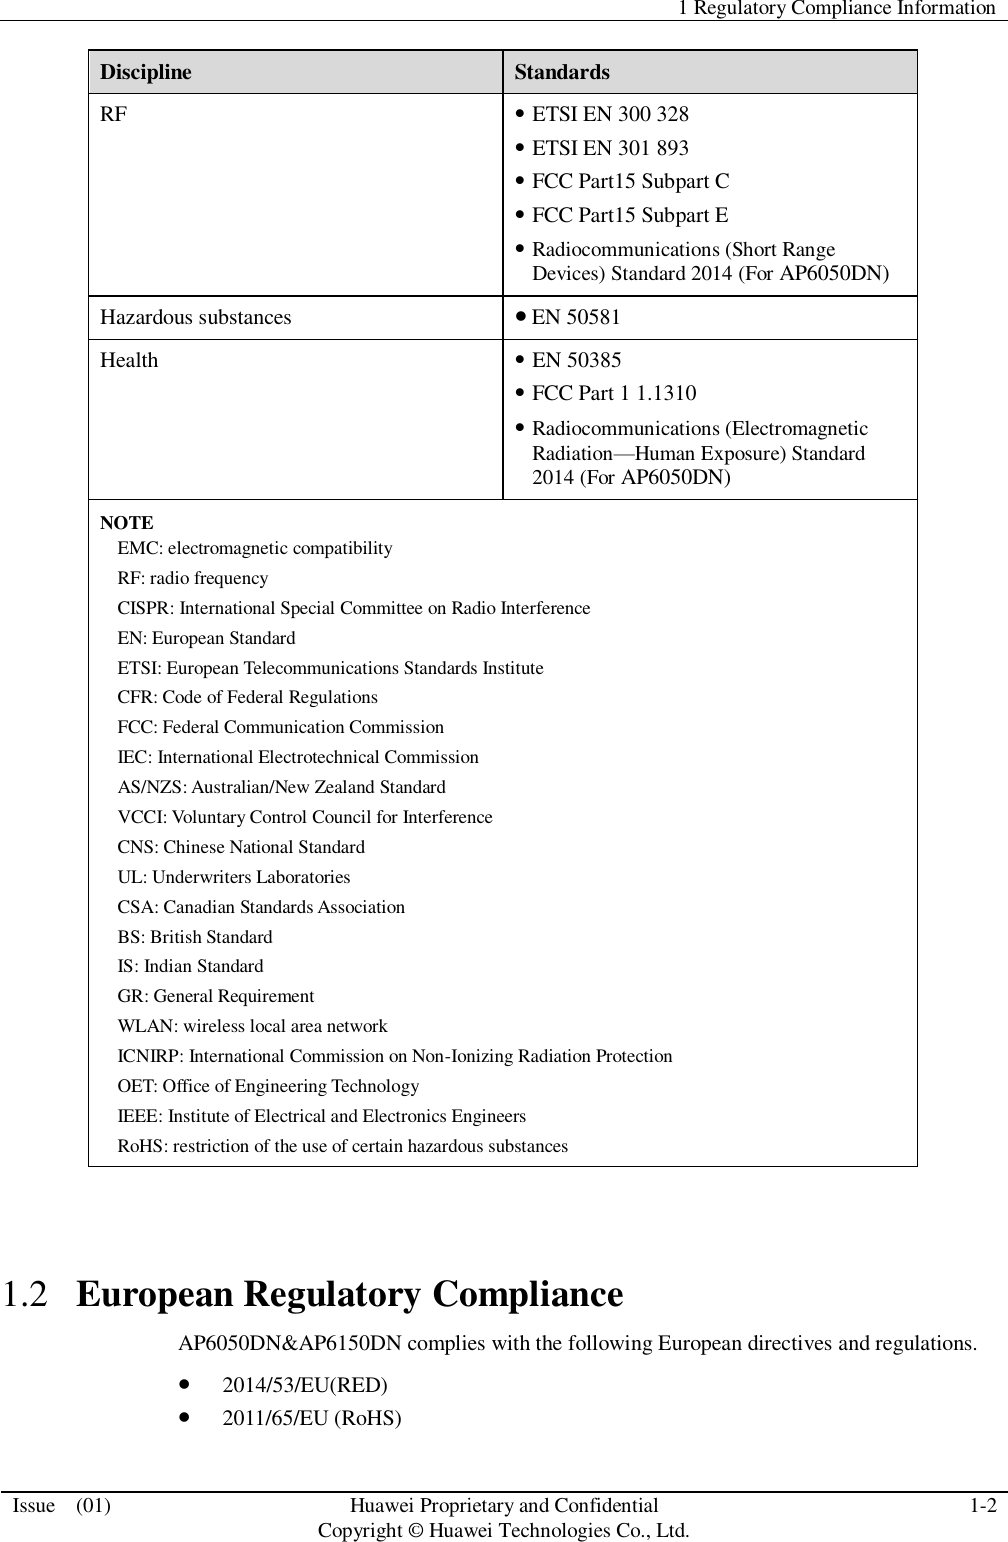   1 Regulatory Compliance Information  Issue    (01) Huawei Proprietary and Confidential                                     Copyright © Huawei Technologies Co., Ltd. 1-2  Discipline Standards RF  ETSI EN 300 328    ETSI EN 301 893  FCC Part15 Subpart C  FCC Part15 Subpart E  Radiocommunications (Short Range Devices) Standard 2014 (For AP6050DN) Hazardous substances  EN 50581 Health  EN 50385  FCC Part 1 1.1310  Radiocommunications (Electromagnetic Radiation—Human Exposure) Standard 2014 (For AP6050DN) NOTE EMC: electromagnetic compatibility RF: radio frequency CISPR: International Special Committee on Radio Interference EN: European Standard ETSI: European Telecommunications Standards Institute CFR: Code of Federal Regulations FCC: Federal Communication Commission IEC: International Electrotechnical Commission AS/NZS: Australian/New Zealand Standard VCCI: Voluntary Control Council for Interference CNS: Chinese National Standard UL: Underwriters Laboratories CSA: Canadian Standards Association BS: British Standard IS: Indian Standard GR: General Requirement WLAN: wireless local area network ICNIRP: International Commission on Non-Ionizing Radiation Protection OET: Office of Engineering Technology IEEE: Institute of Electrical and Electronics Engineers RoHS: restriction of the use of certain hazardous substances  1.2   European Regulatory Compliance AP6050DN&amp;AP6150DN complies with the following European directives and regulations.  2014/53/EU(RED)  2011/65/EU (RoHS) 